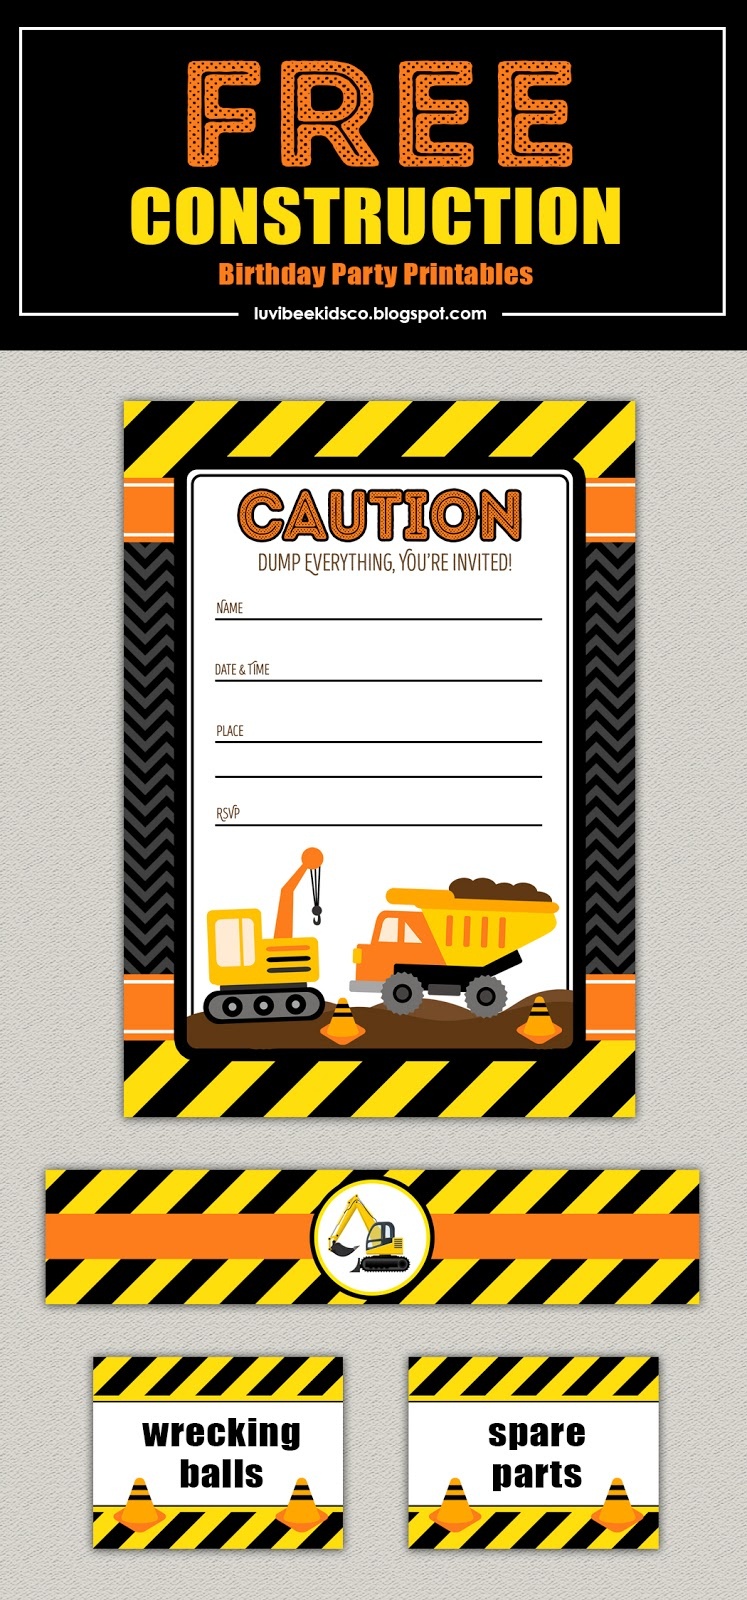 Free Construction Birthday Party Printables - Free Construction Party Printables